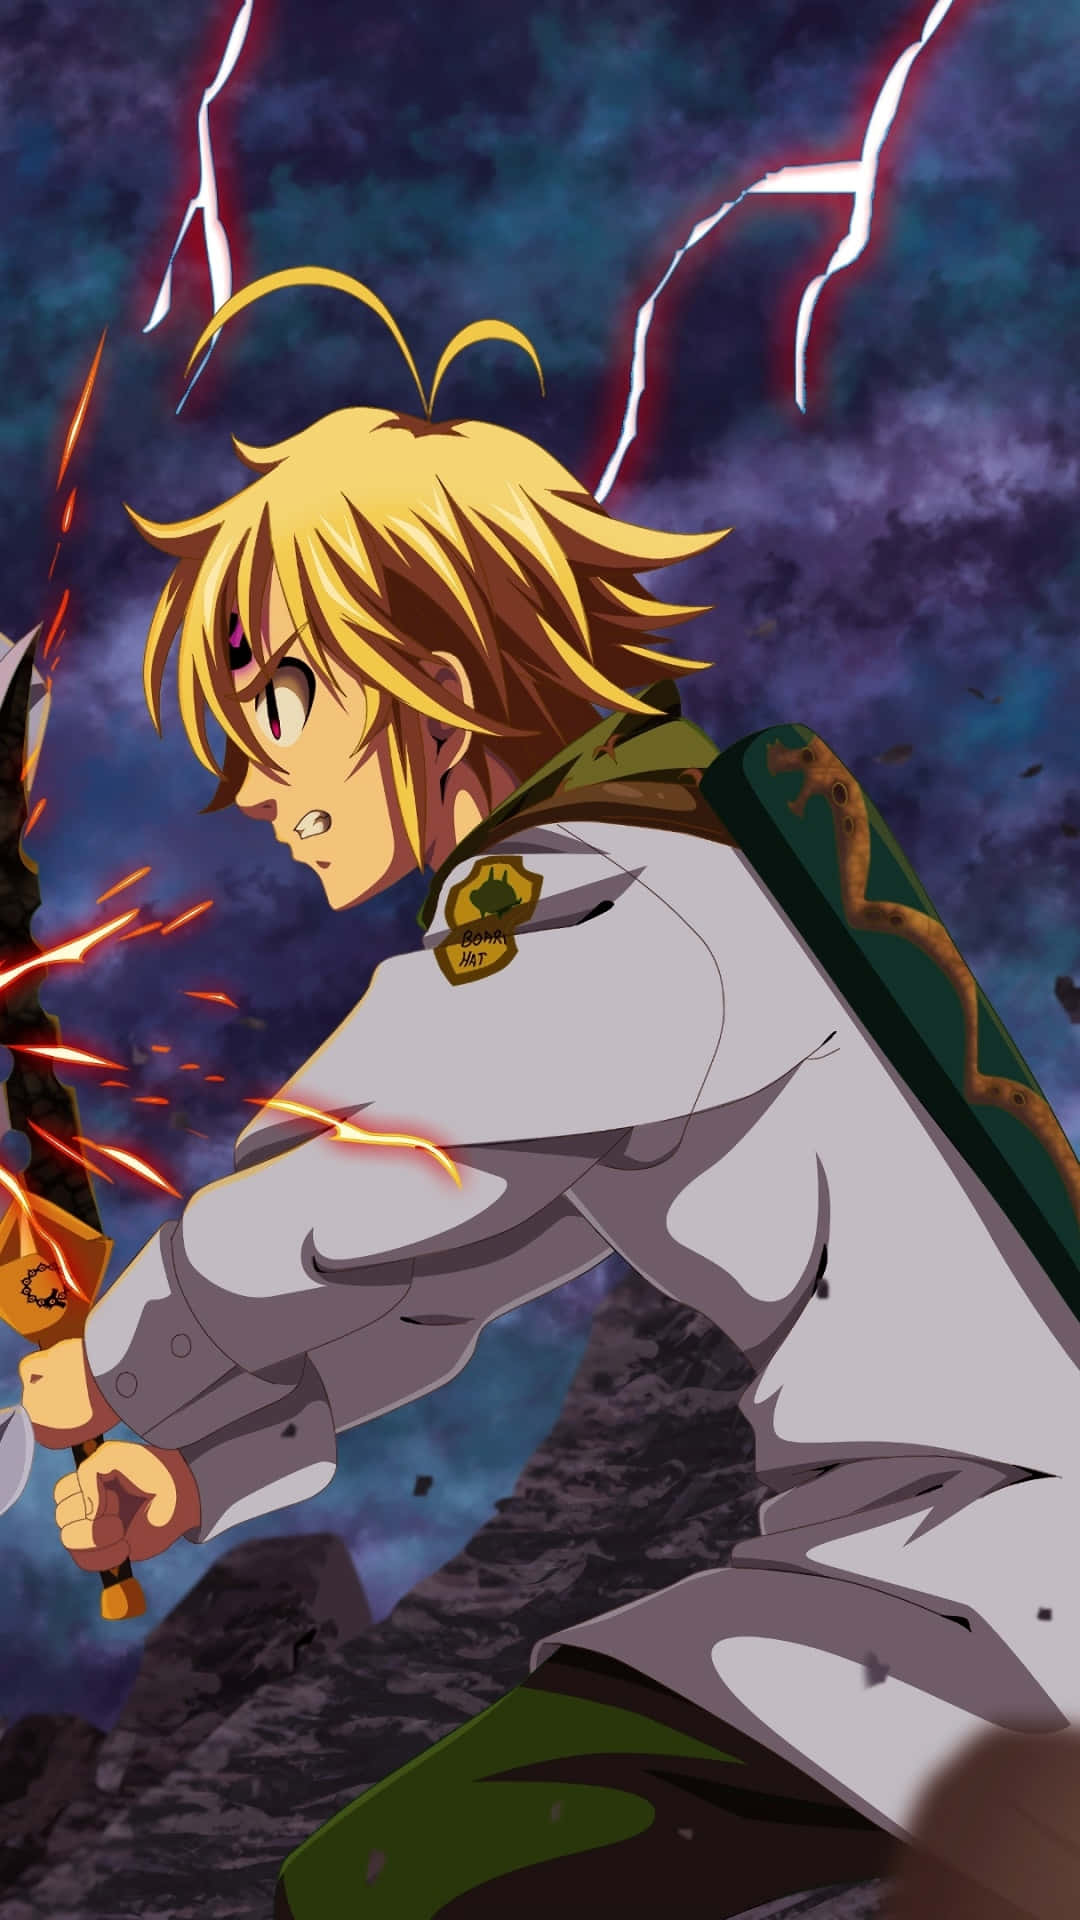 Get the Seven Deadly Sins Iphone and experience a whole new world of multimedia Wallpaper